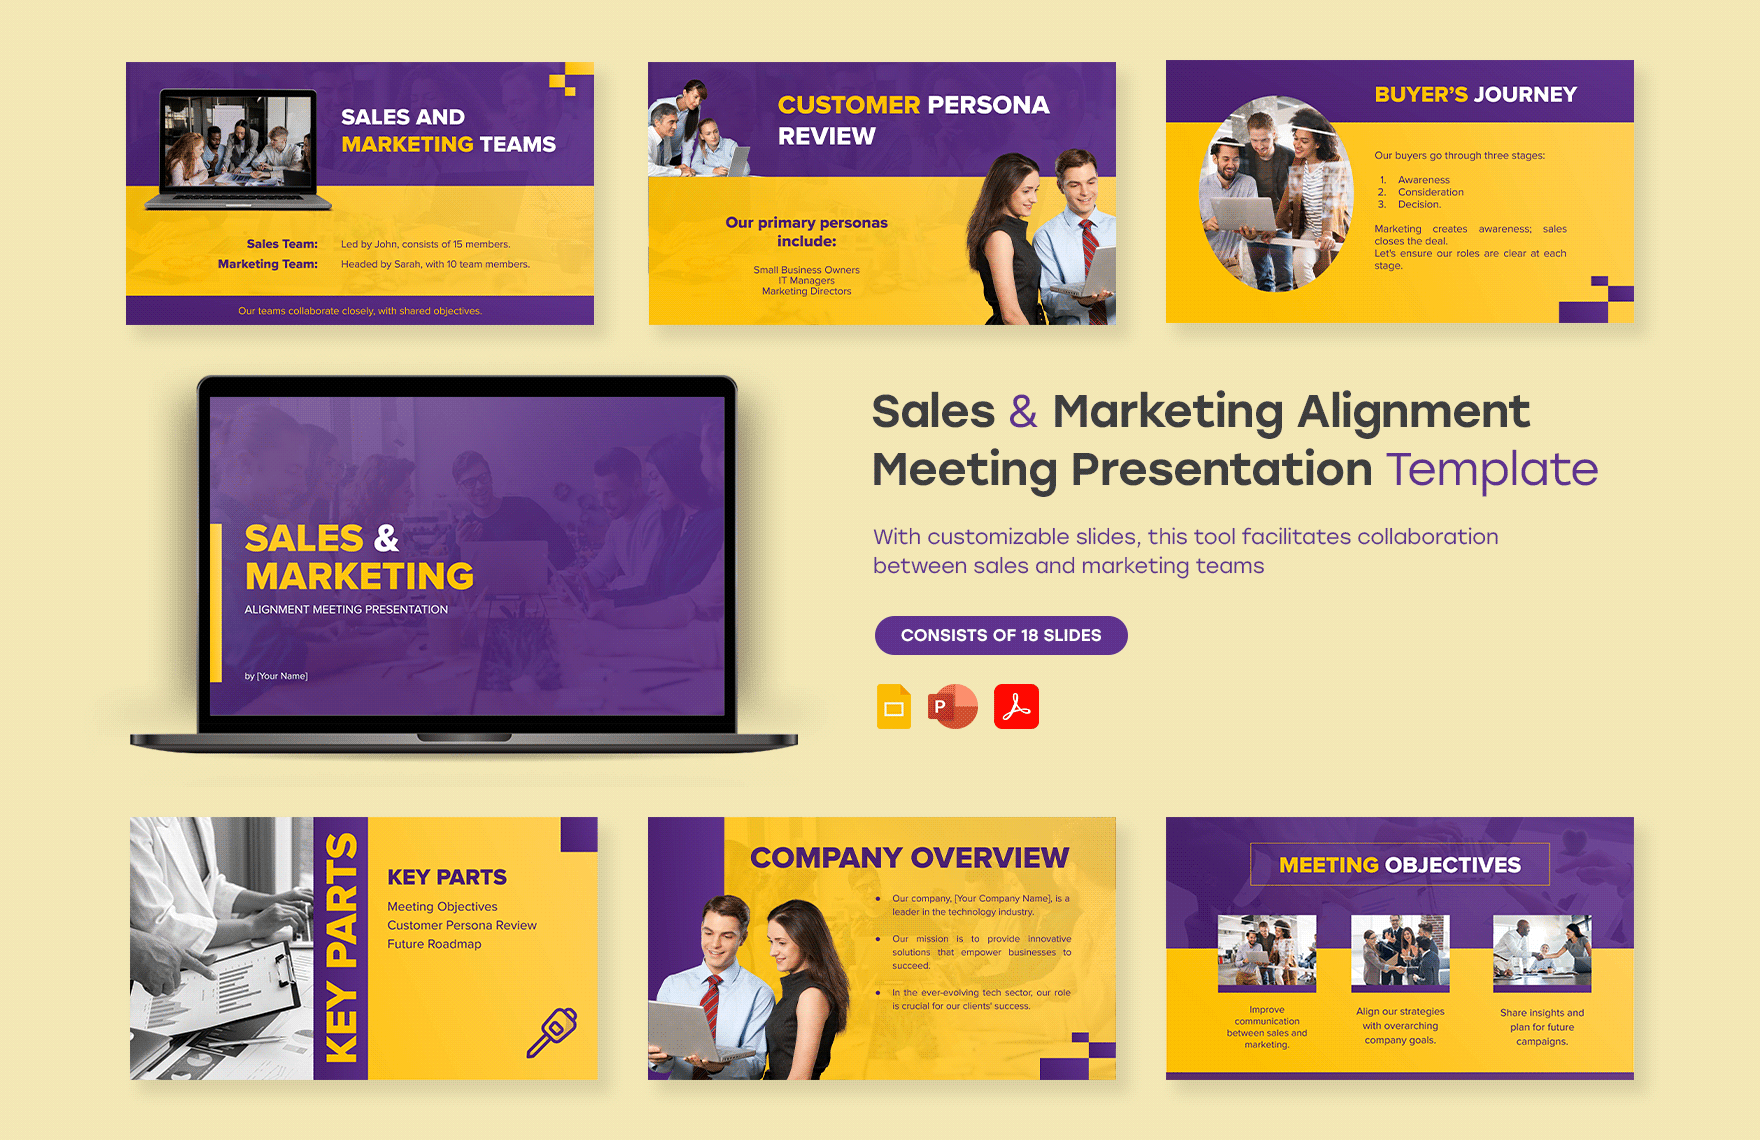 Sales and Marketing Alignment Meeting Presentation Template